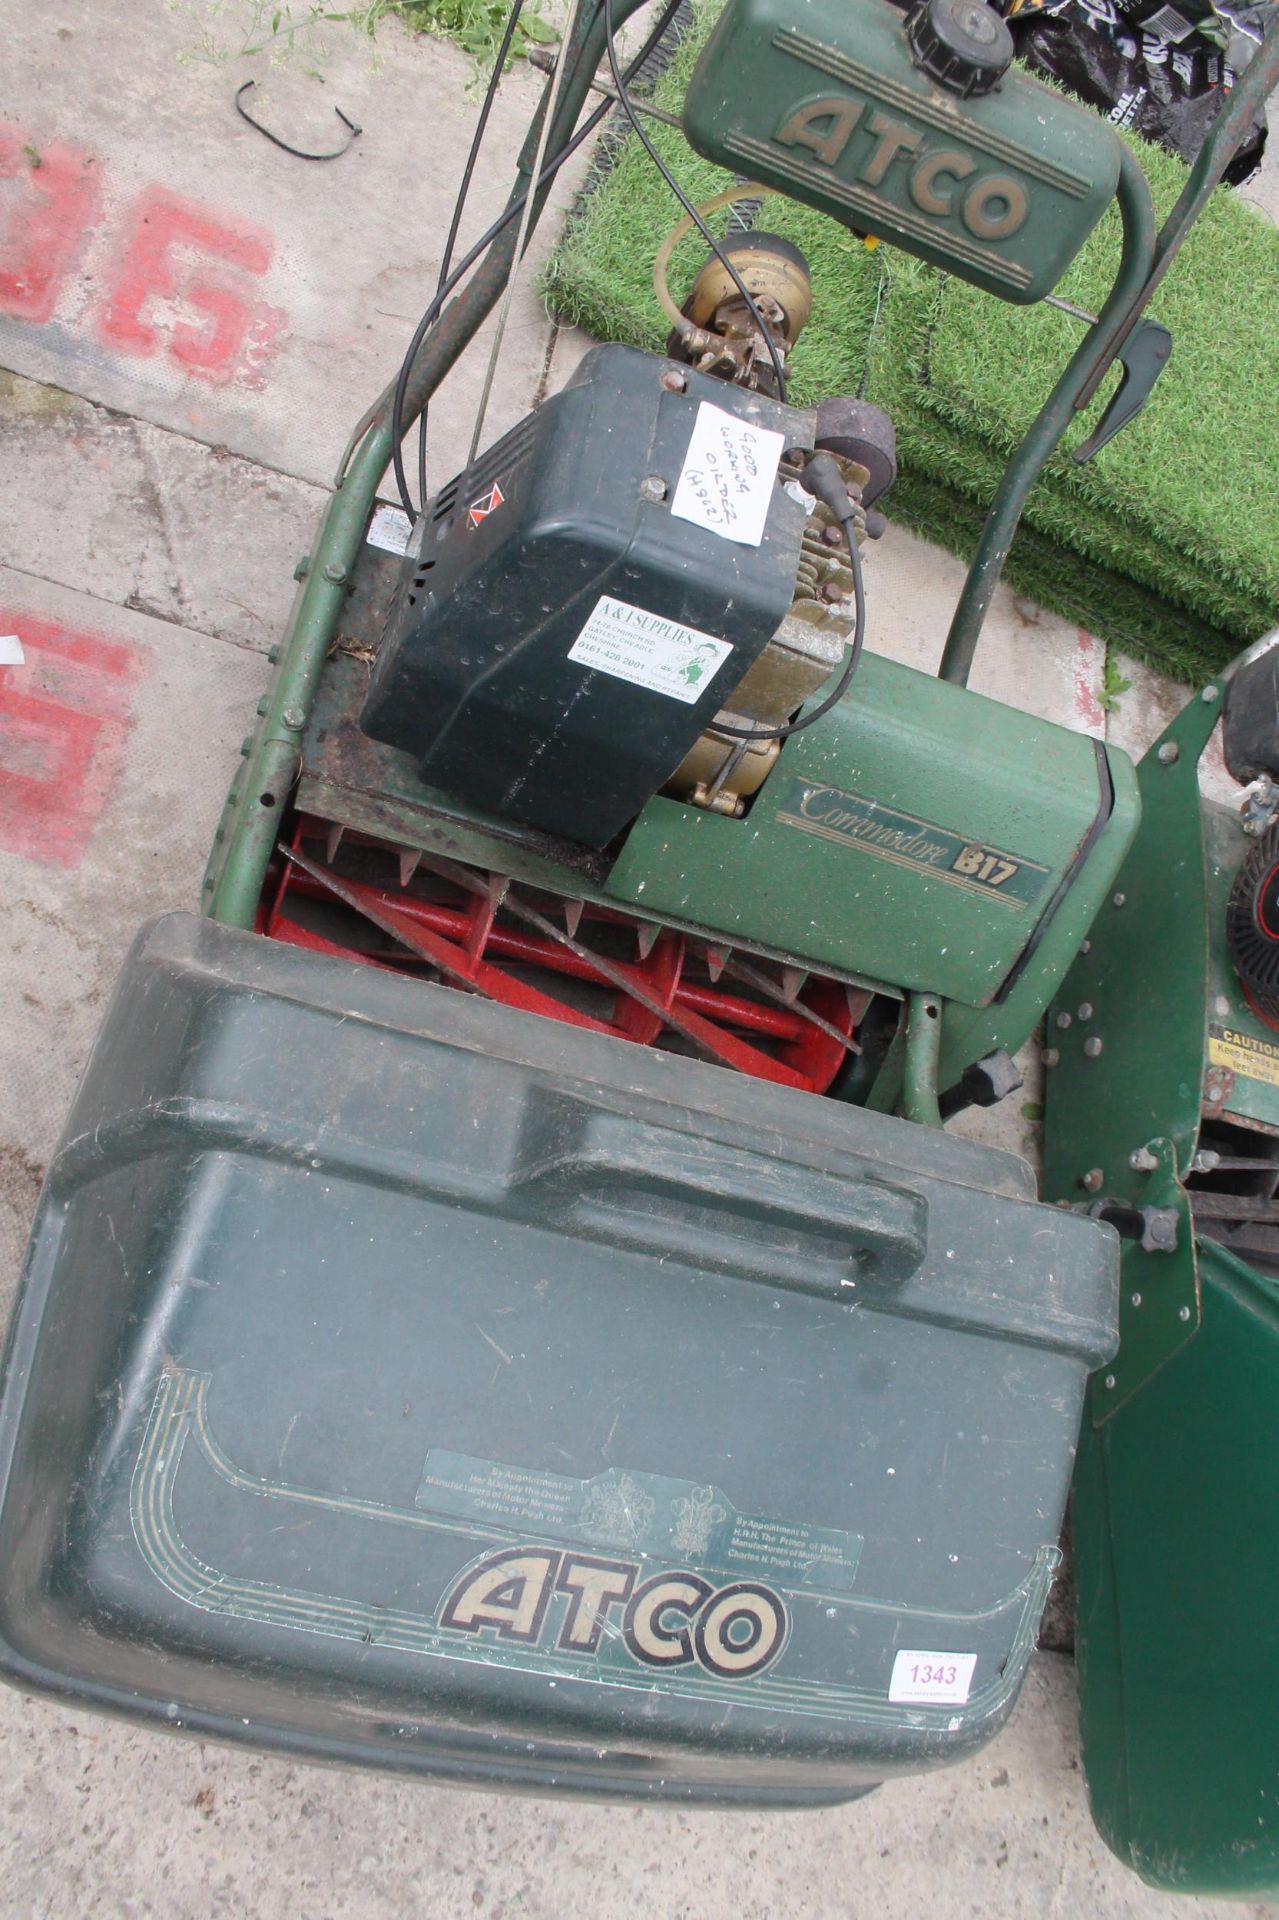 ATCO COMMODORE B17 MOWER IN GOOD WORKING ORDER NO VAT - Image 2 of 2